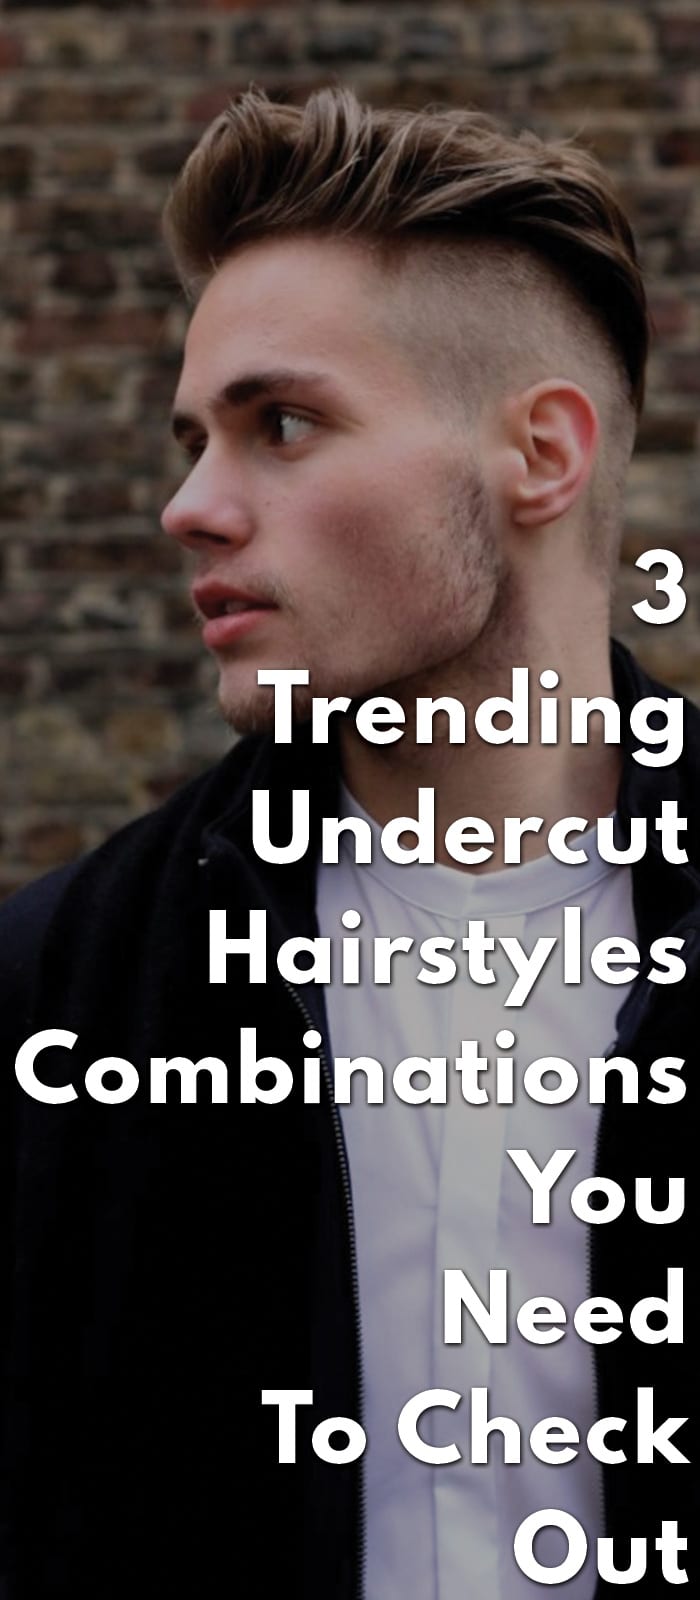 3-Trending-Undercut-Hairstyles-Combinations-You-Need-To-Check-Out